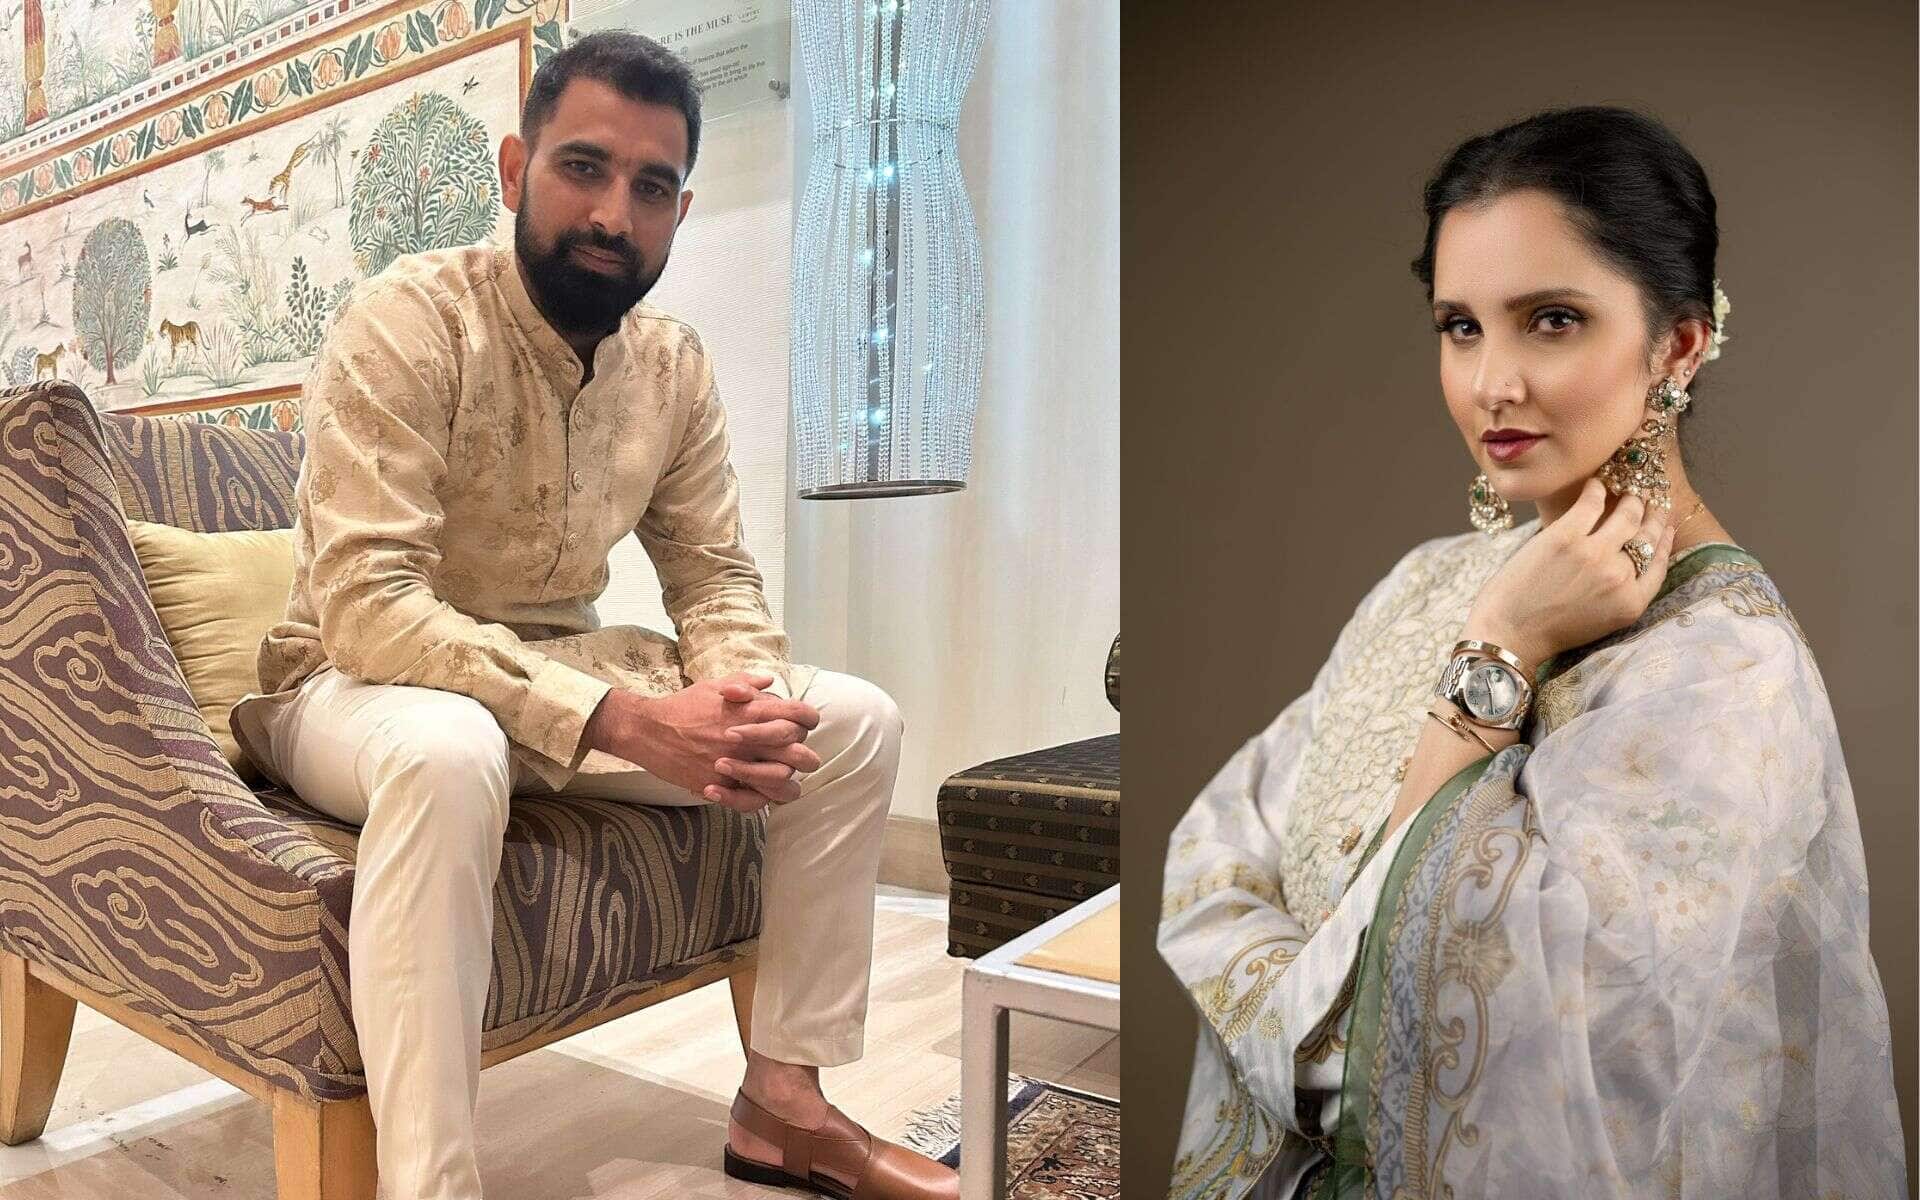 Mohammed Shami Getting Married To Sania Mirza? Tennis Legends' Father Responds To Marriage Speculations